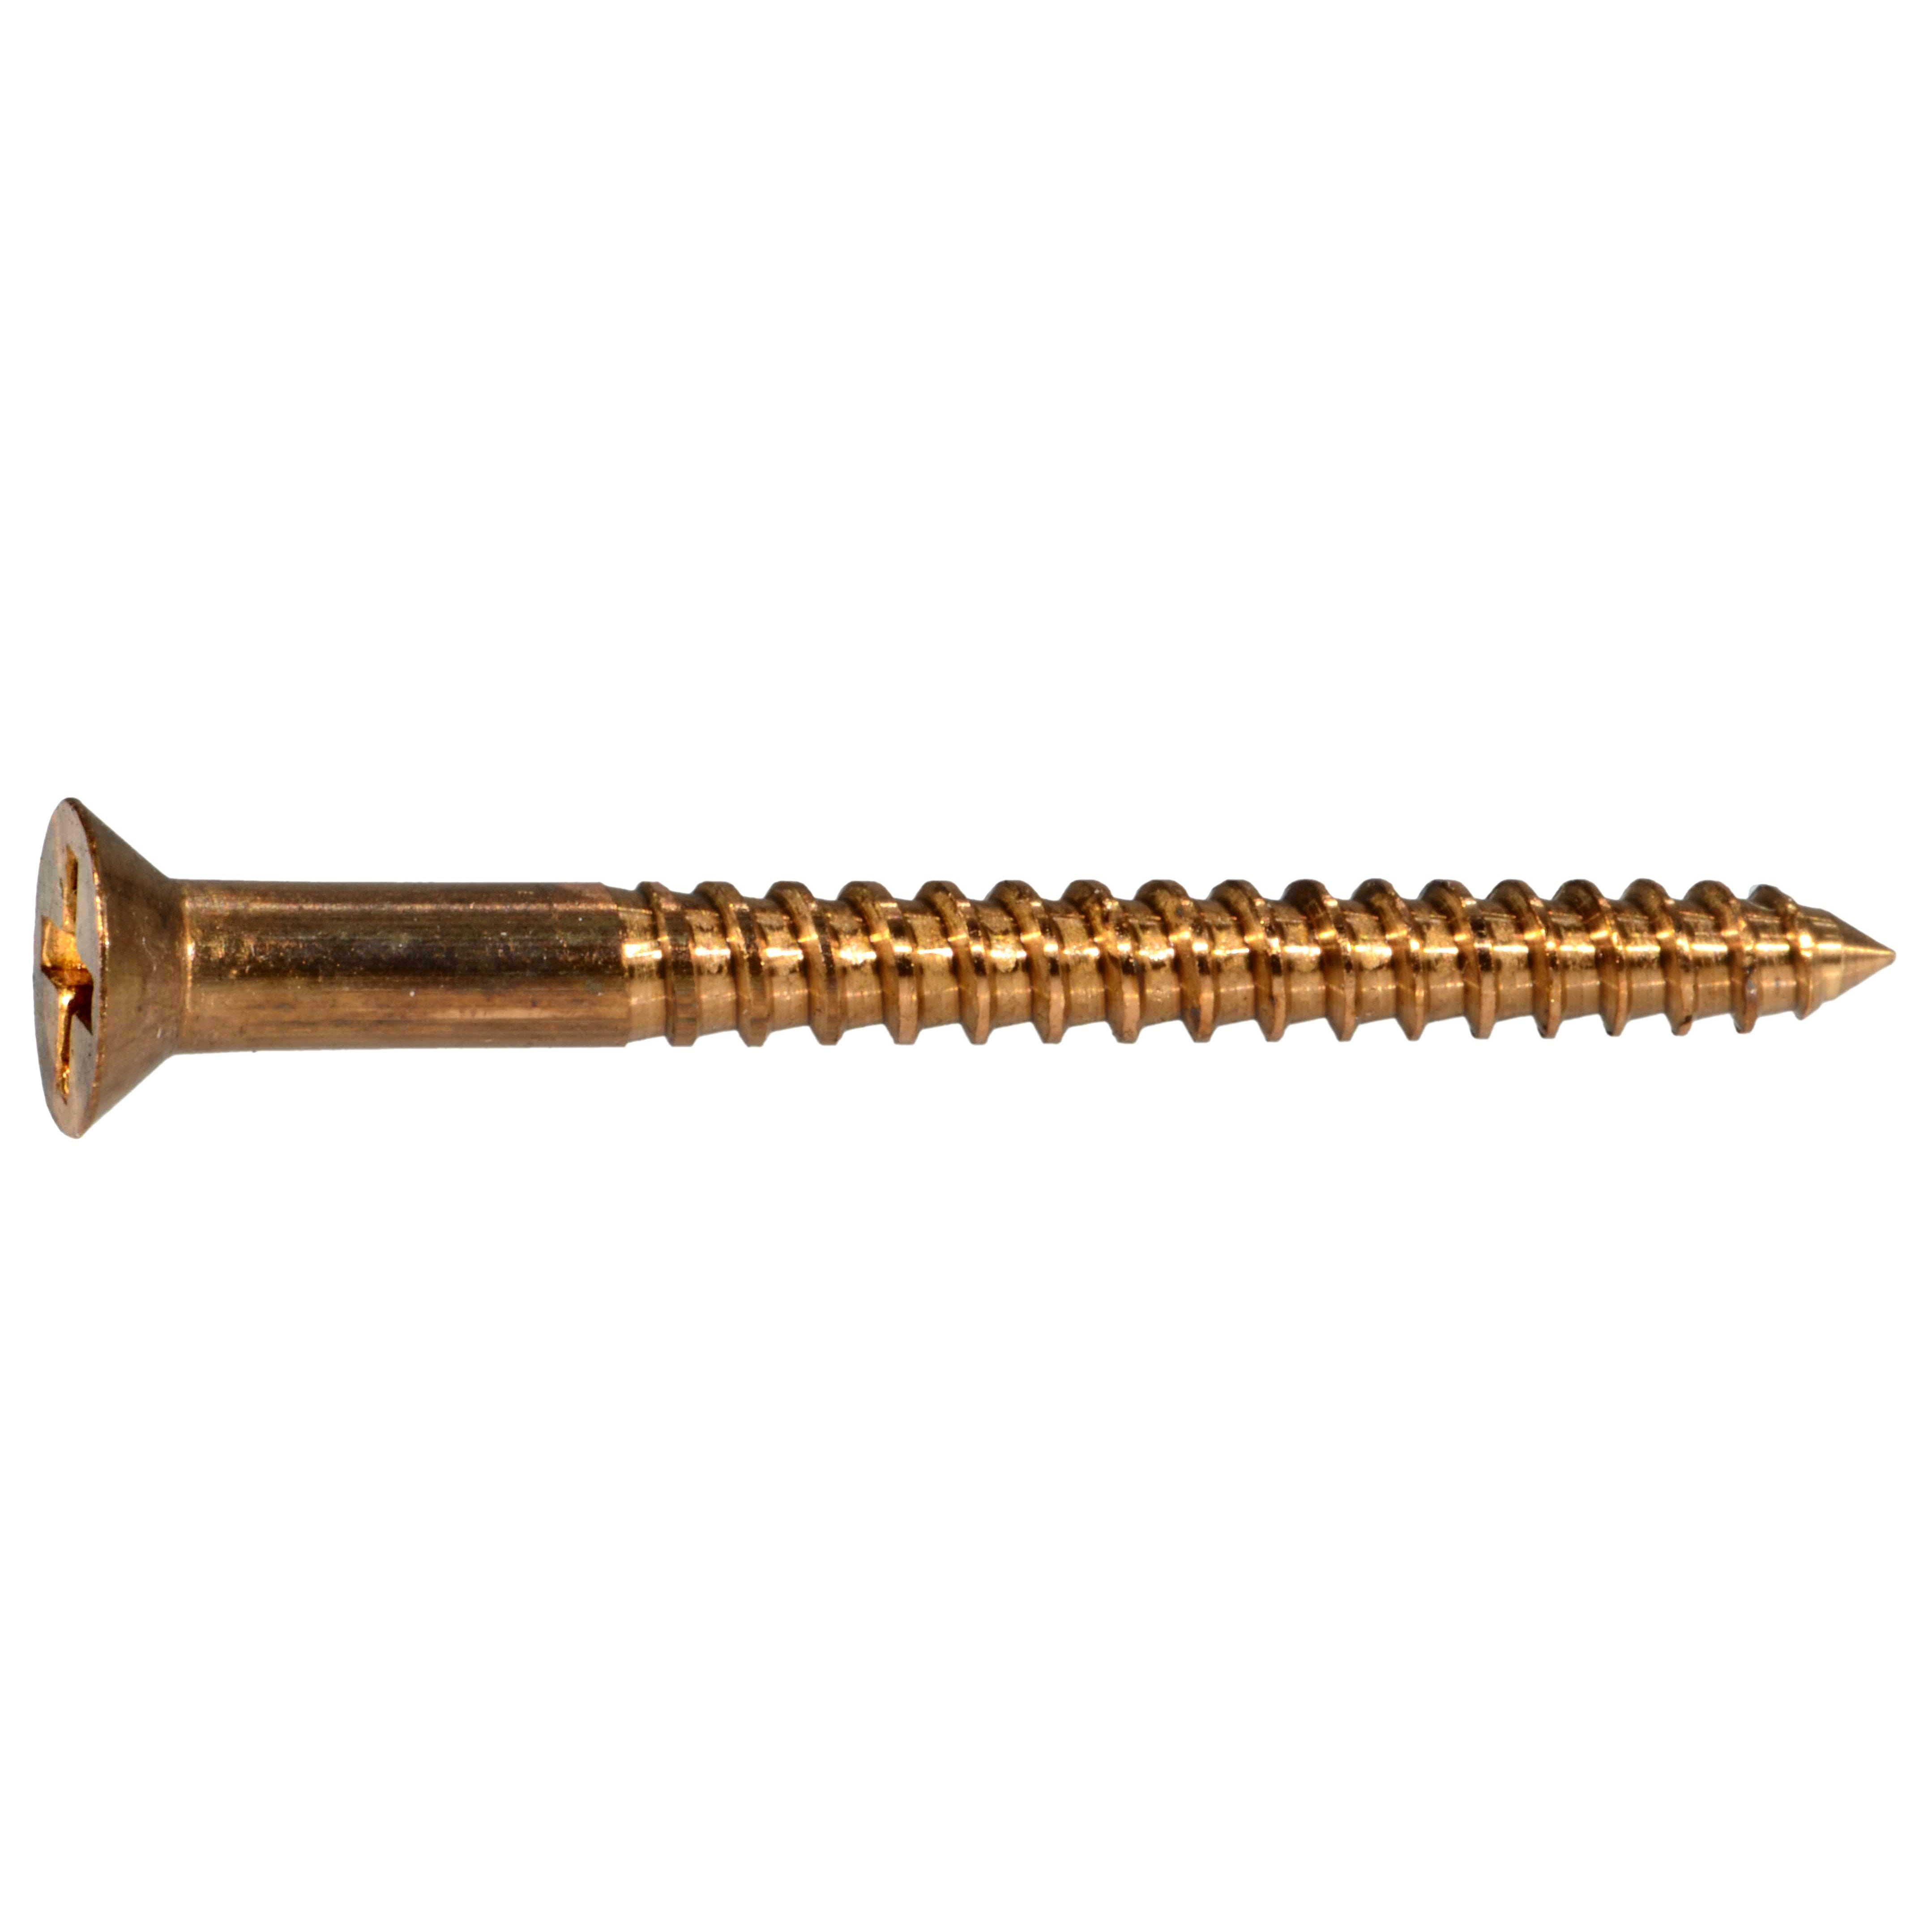 6-32 X 1 1/4 Slotted Round Machine Screw Silicon Bronze Package Qty 100 